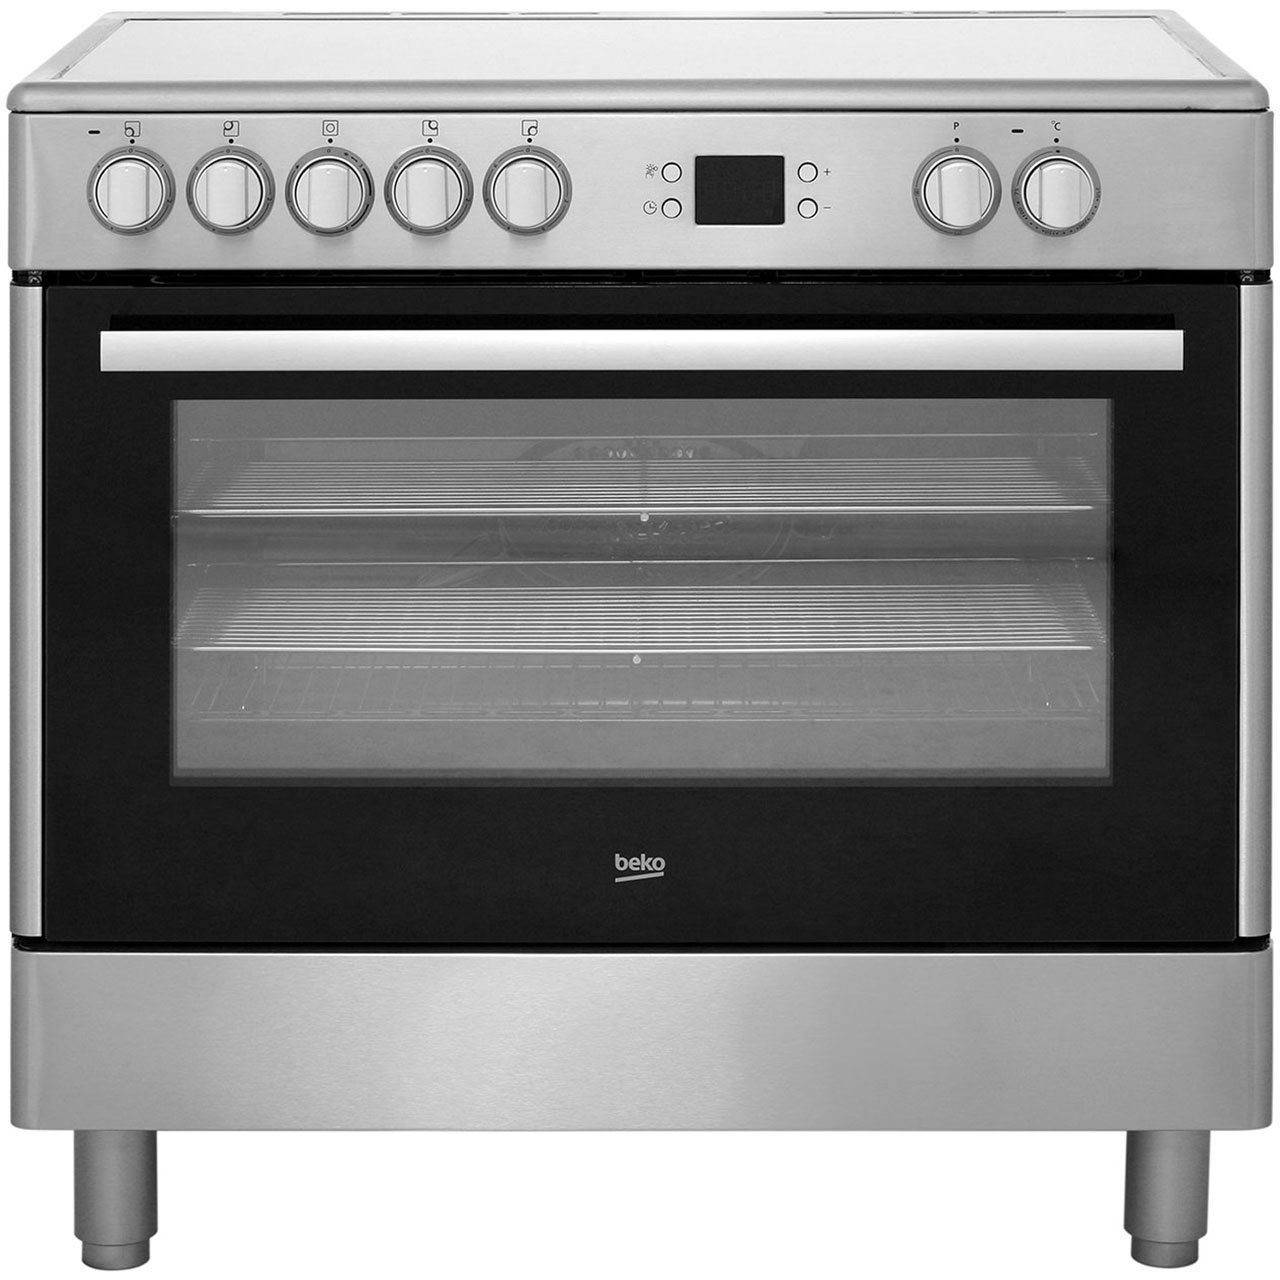 Small range oven cleaned by Ultra Clean Ovens from £95